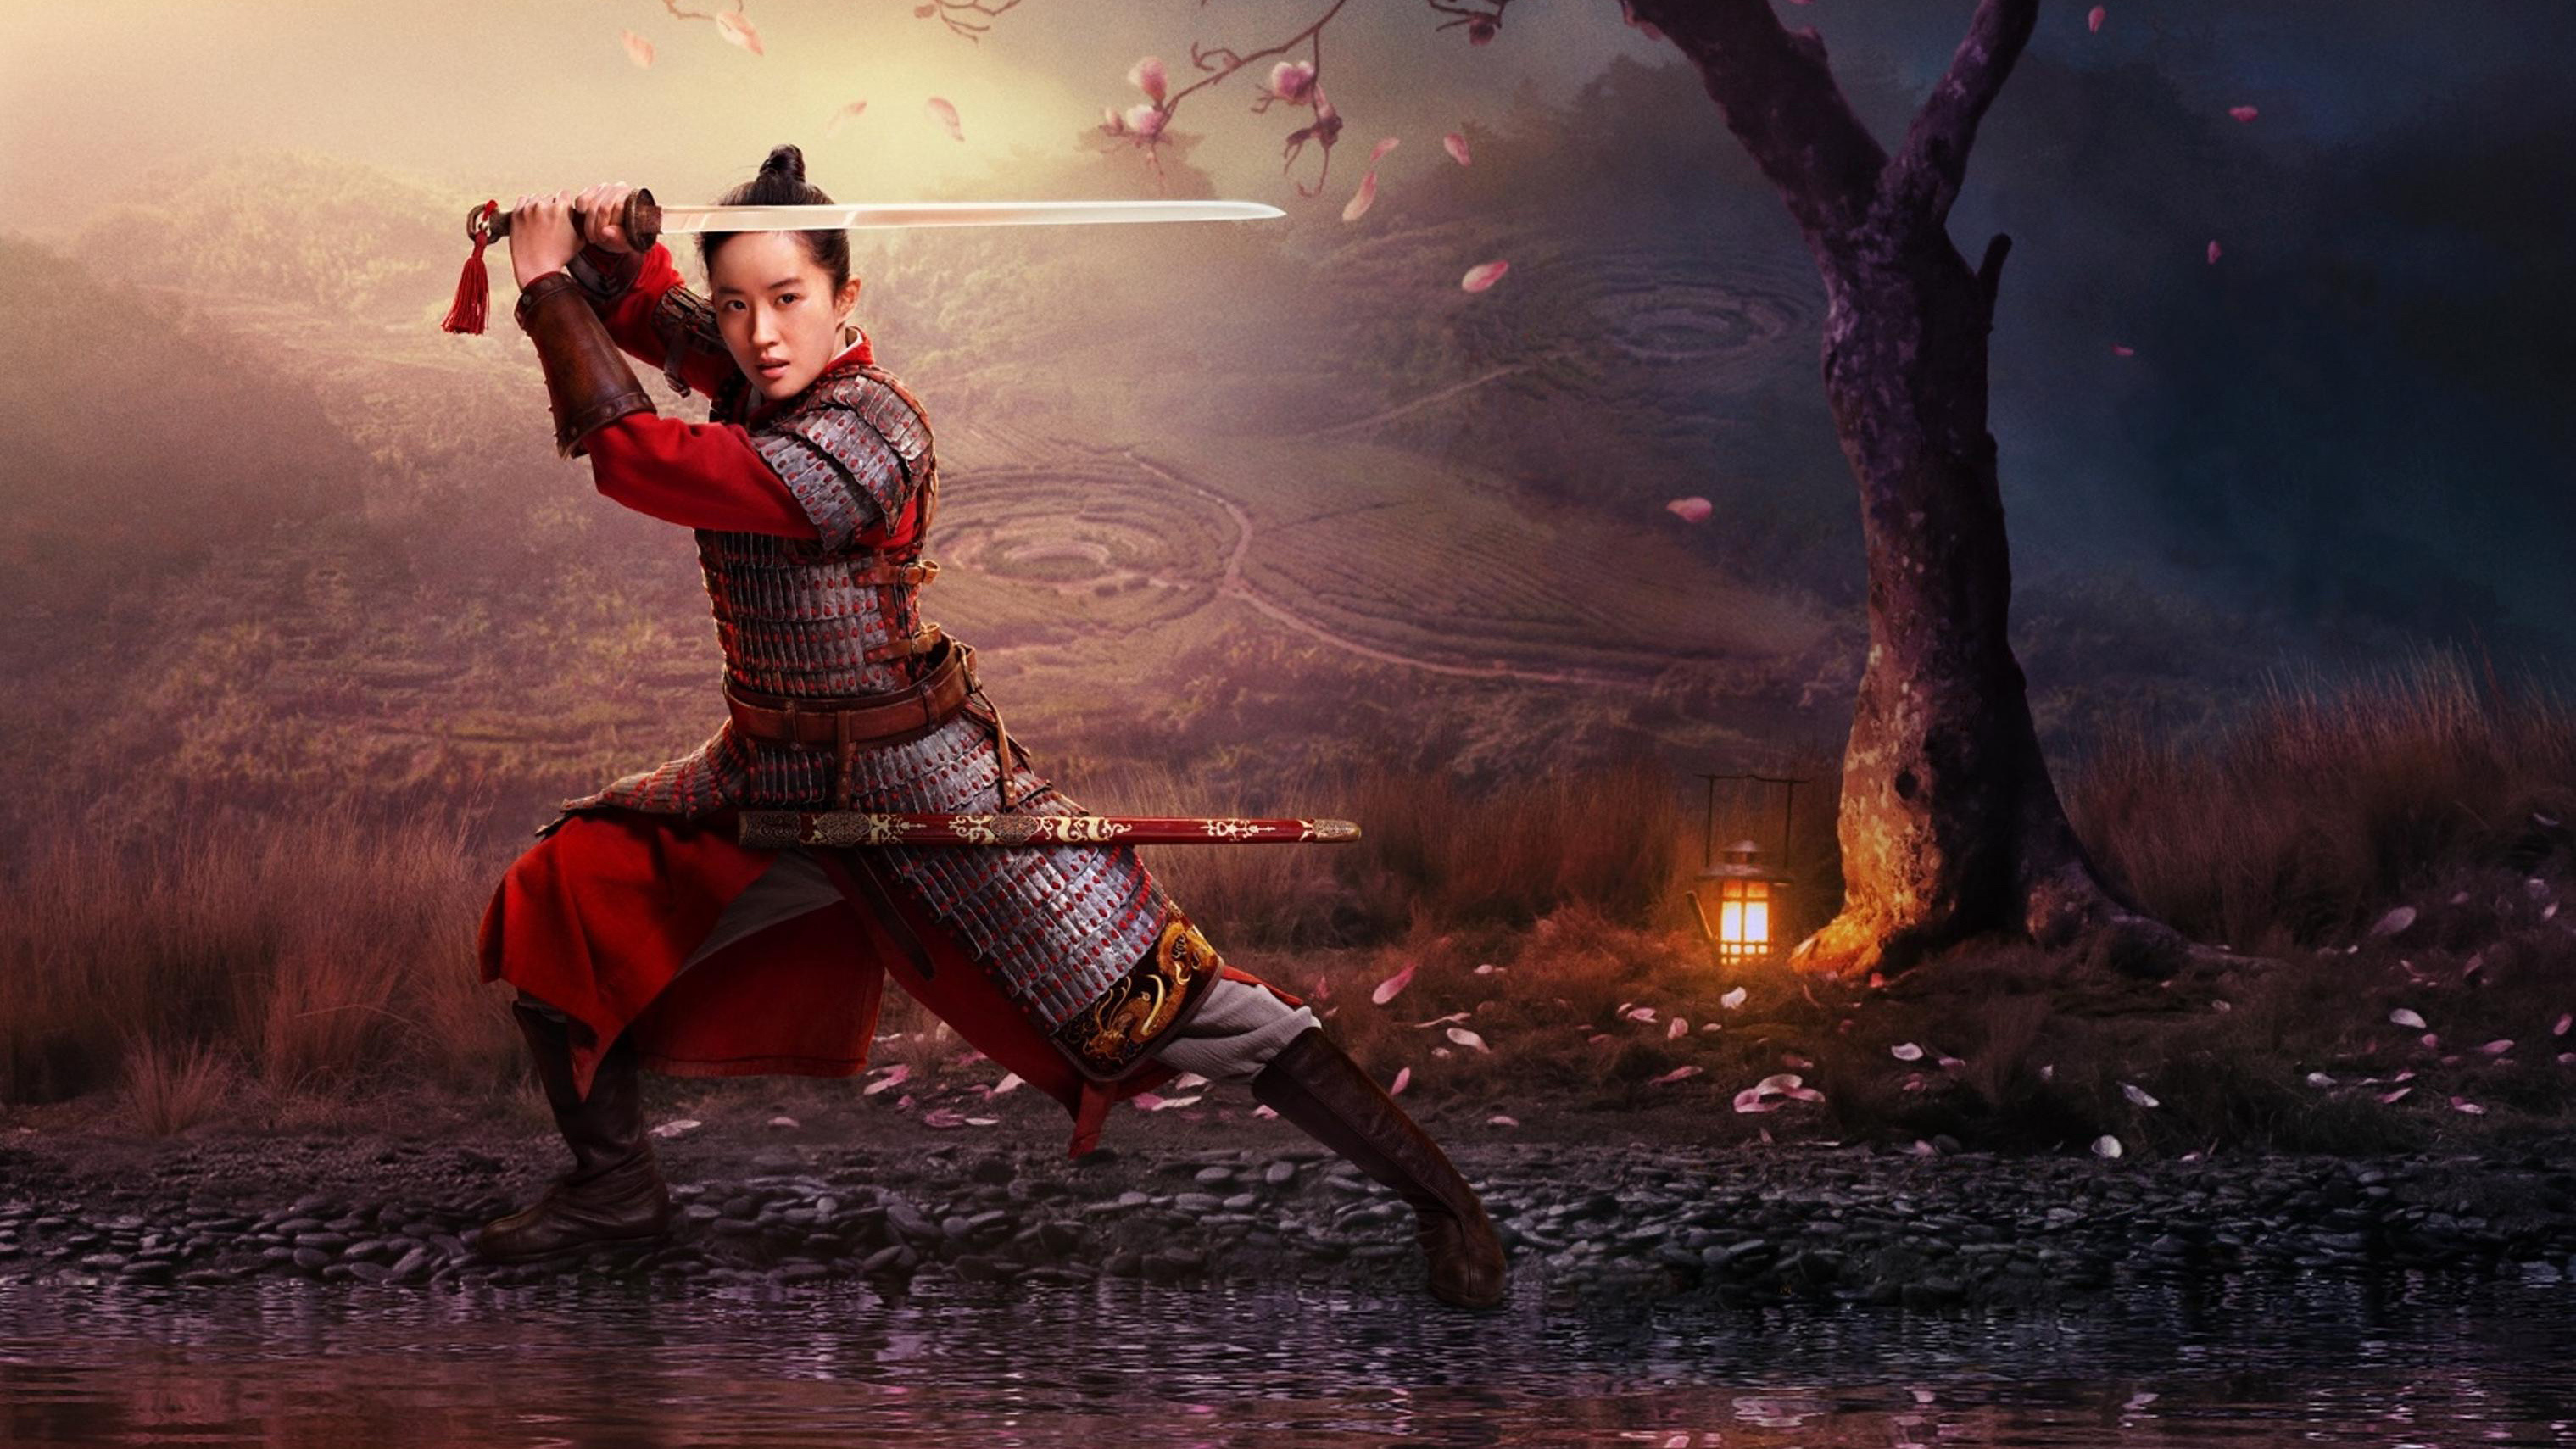 Mulan (Movie): A 2020 American fantasy action drama film produced by Walt Disney Pictures. 3040x1710 HD Wallpaper.